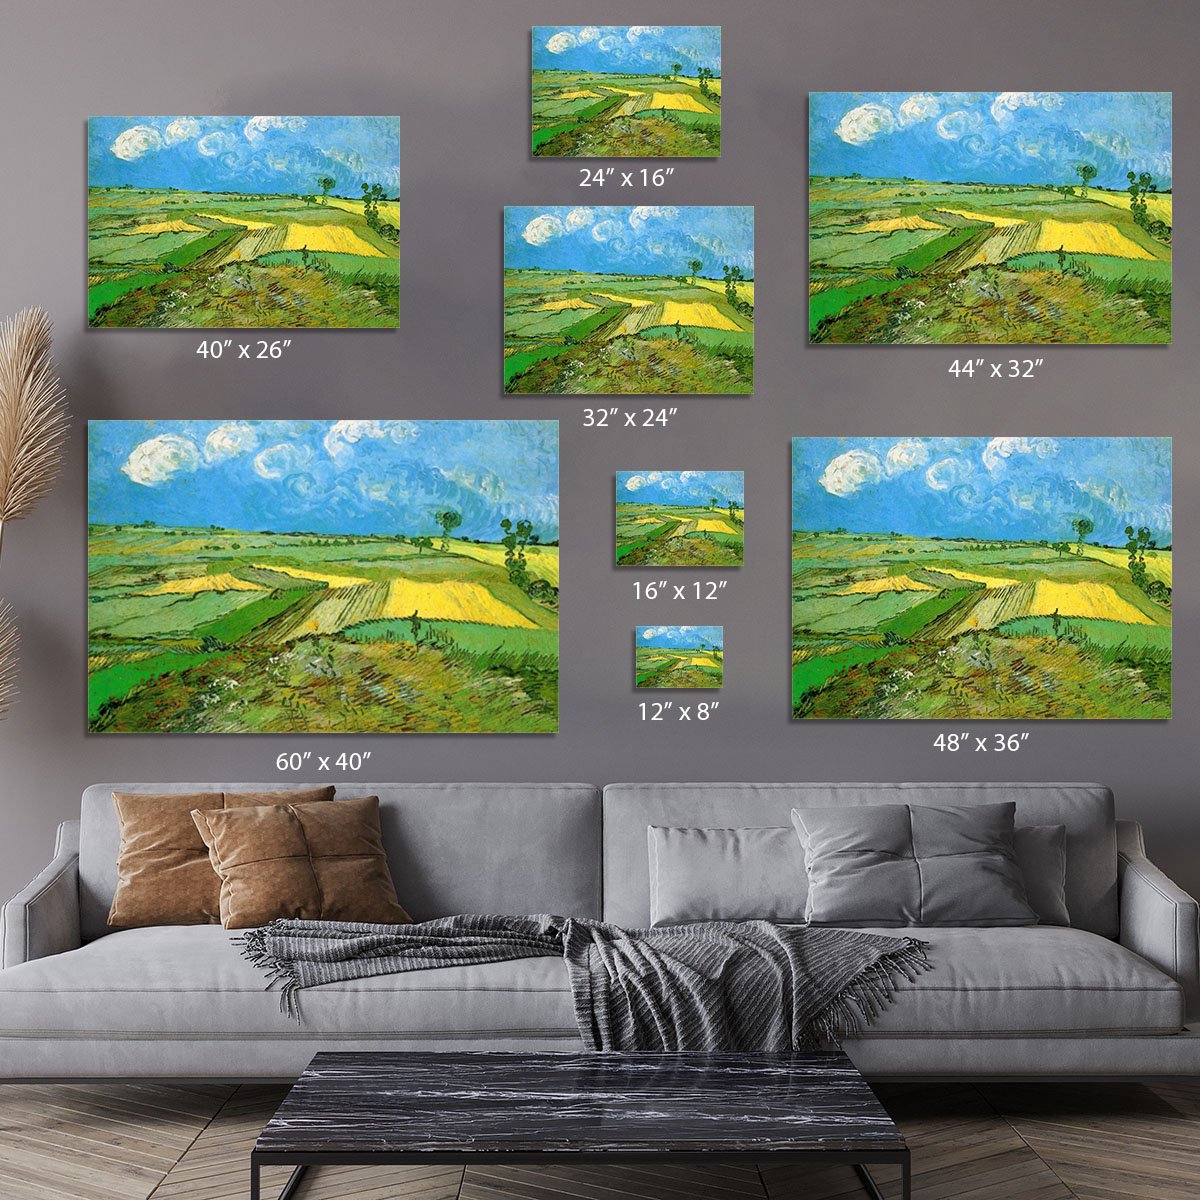 Wheat Fields at Auvers Under Clouded Sky by Van Gogh Canvas Print or Poster